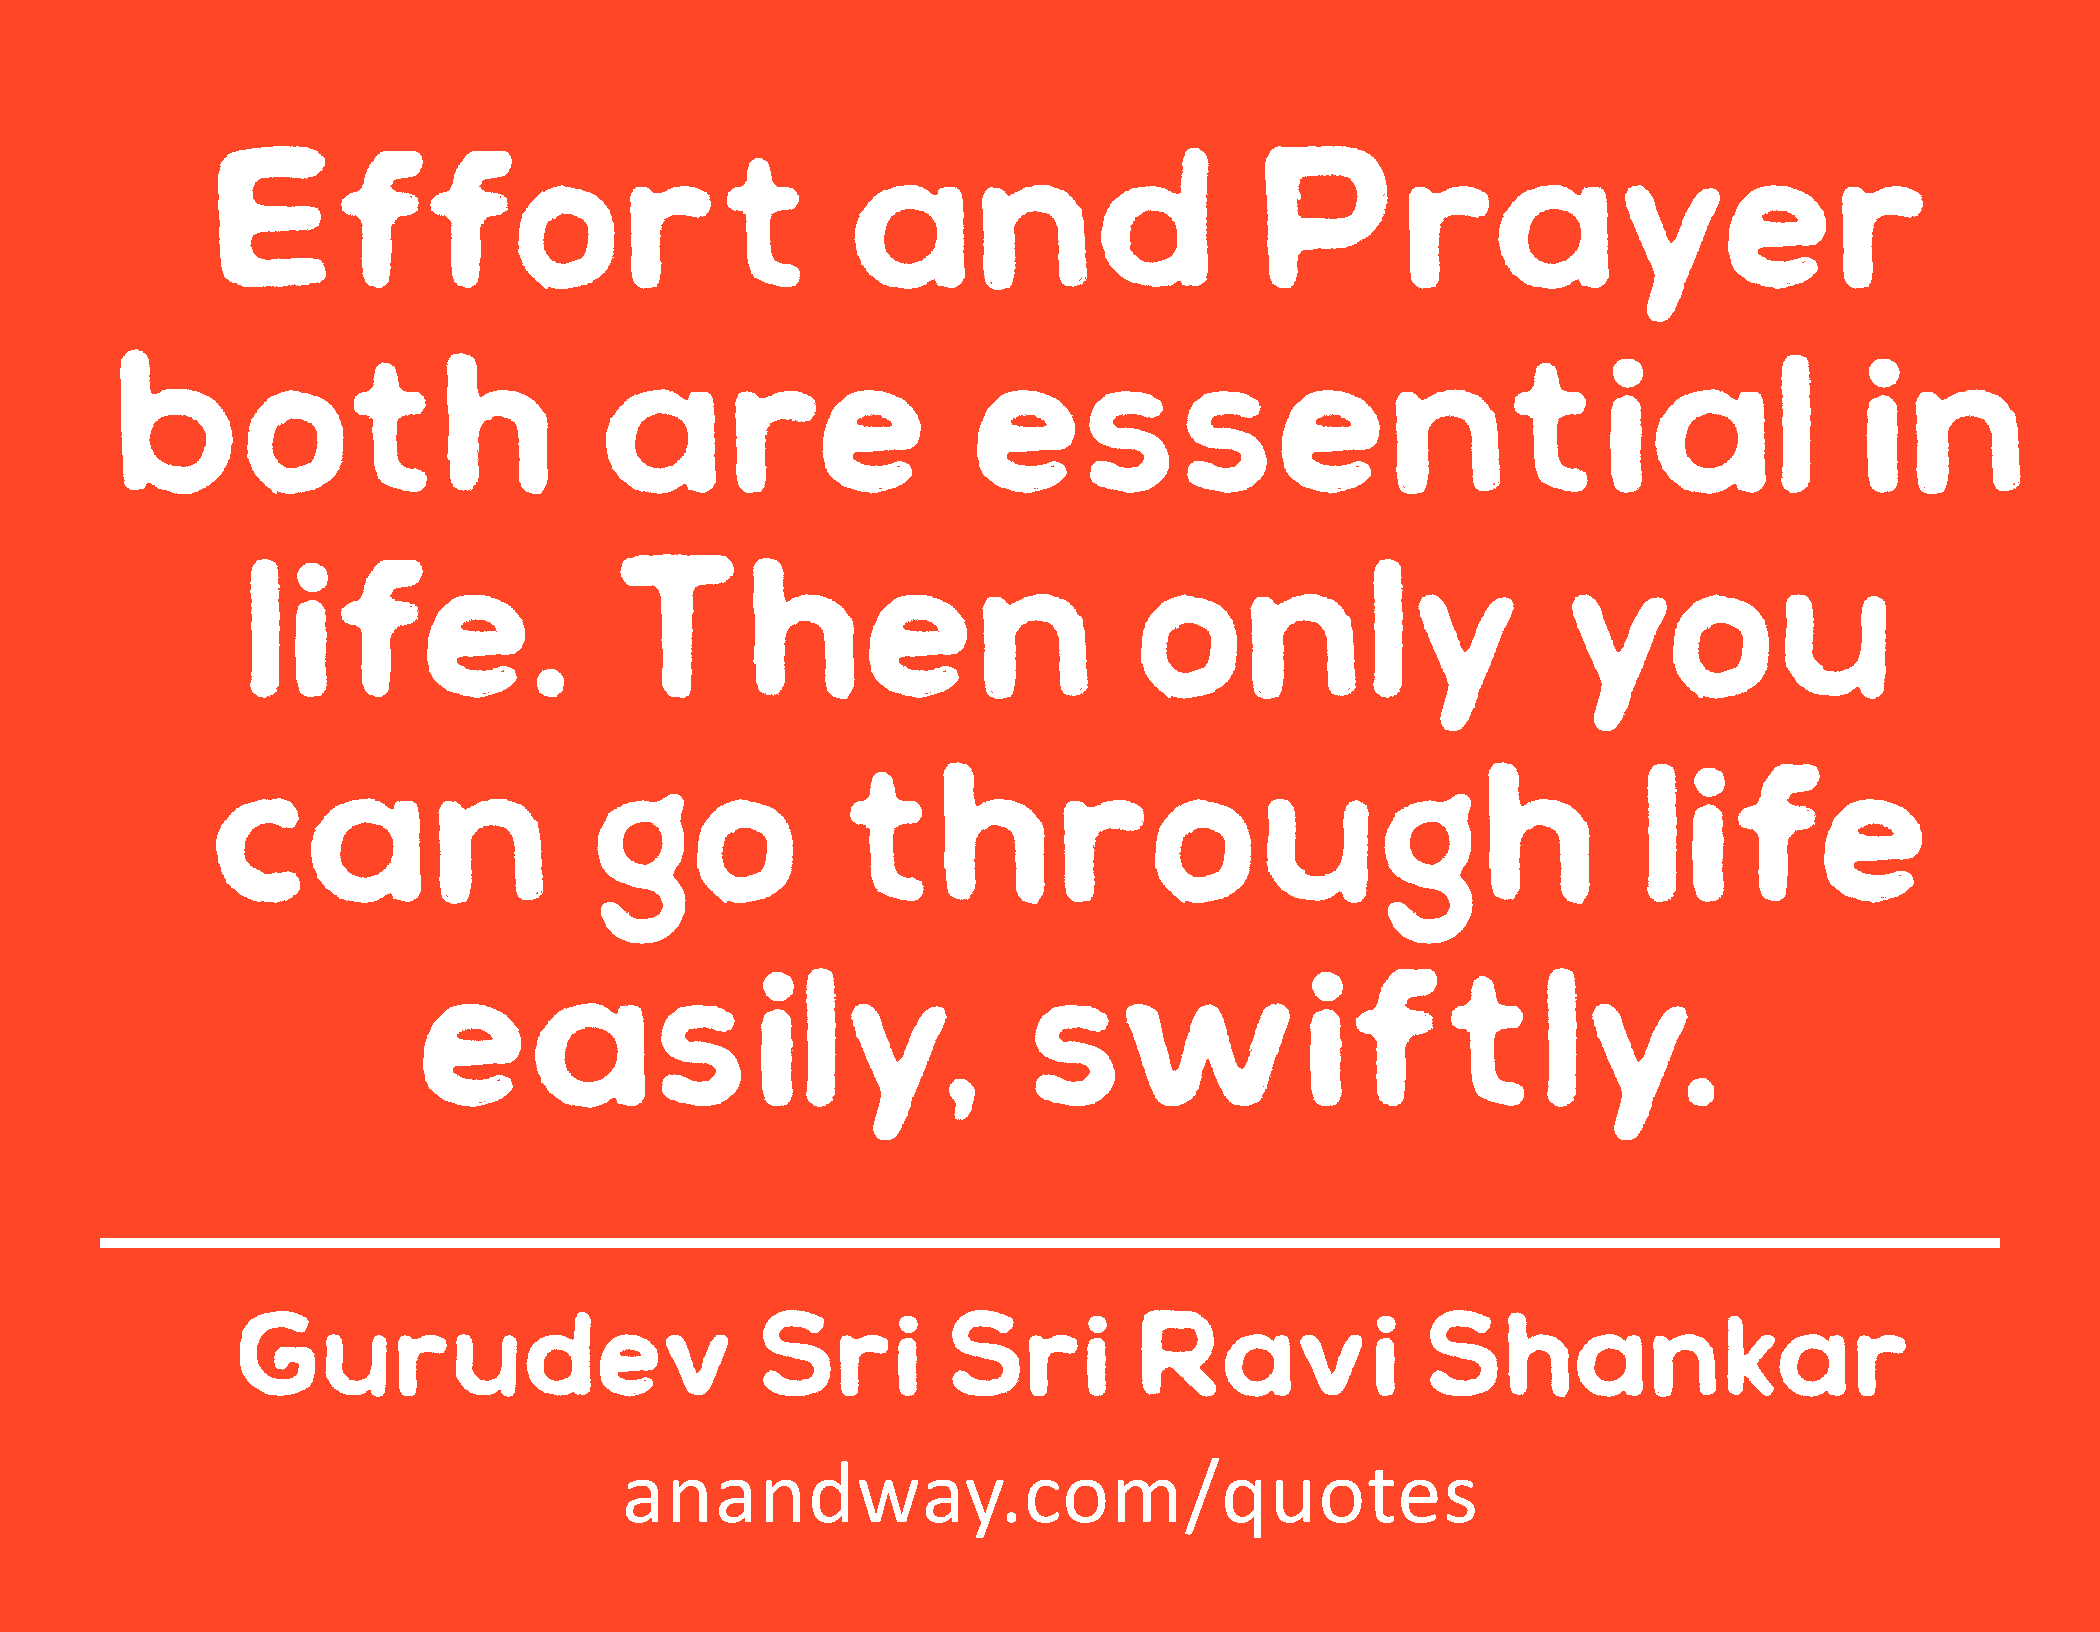 Effort and Prayer both are essential in life. Then only you can go through life easily, swiftly. 
 -Gurudev Sri Sri Ravi Shankar